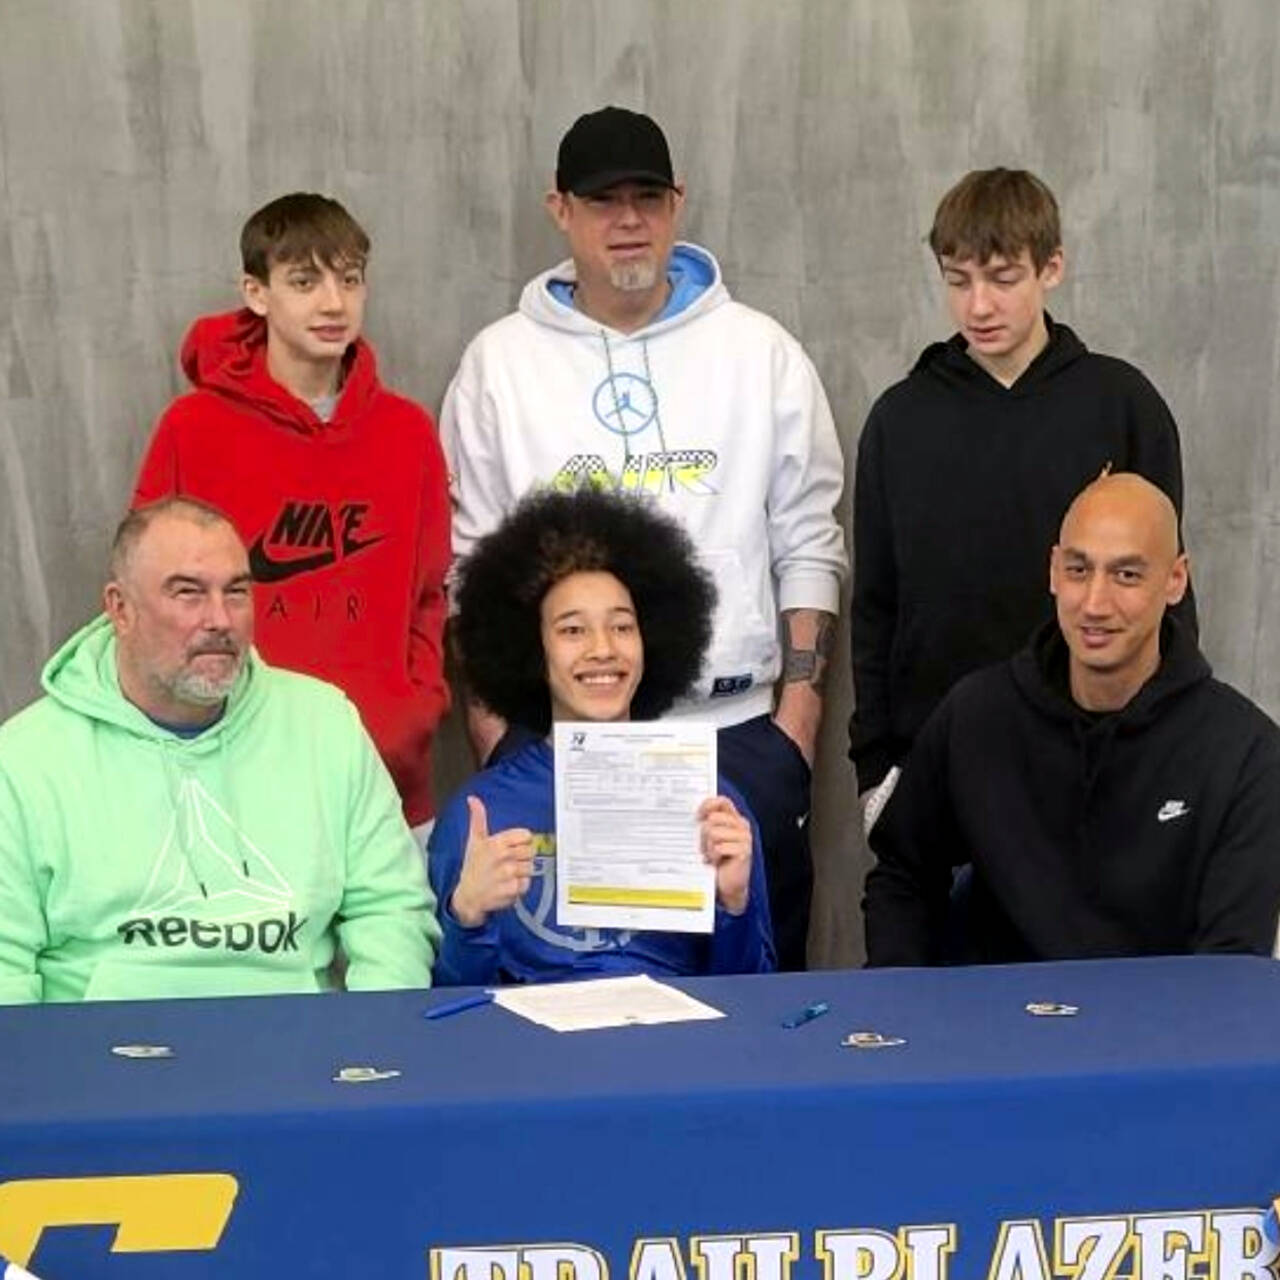 SUBMITTED PHOTO Aberdeen senior guard Maddie Gore (front row, middle) gives a thumbs up after signing a Letter of Intent to compete for Centralia College on Saturday in Centralia. Pictured are (front row, from left) Robert Gore, Maddie Gore, Jimmy McDaniel, (back row, from left) Talon Morrill, Brian Morill and Quinton Morrill.